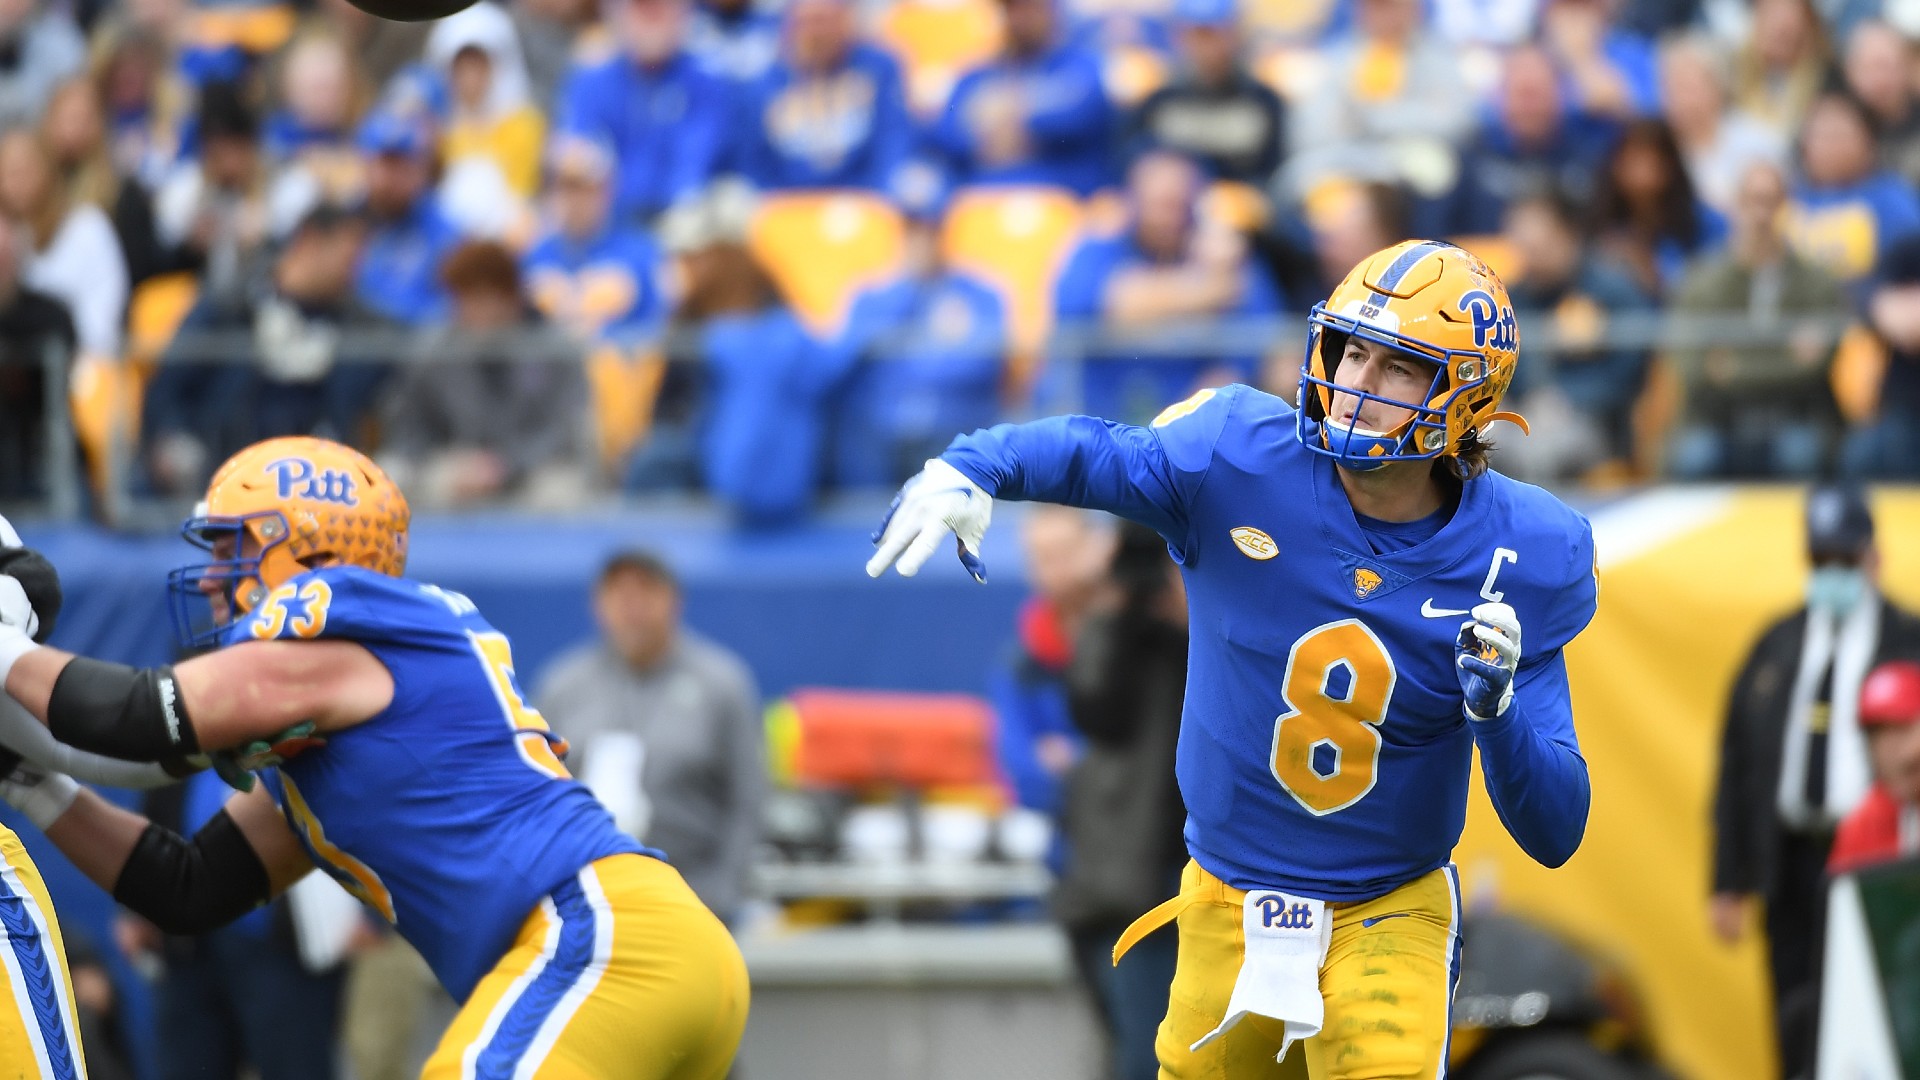 Pitt vs. Duke Odds, Picks: Bet the Panthers to Win Big (Saturday, November 6) article feature image